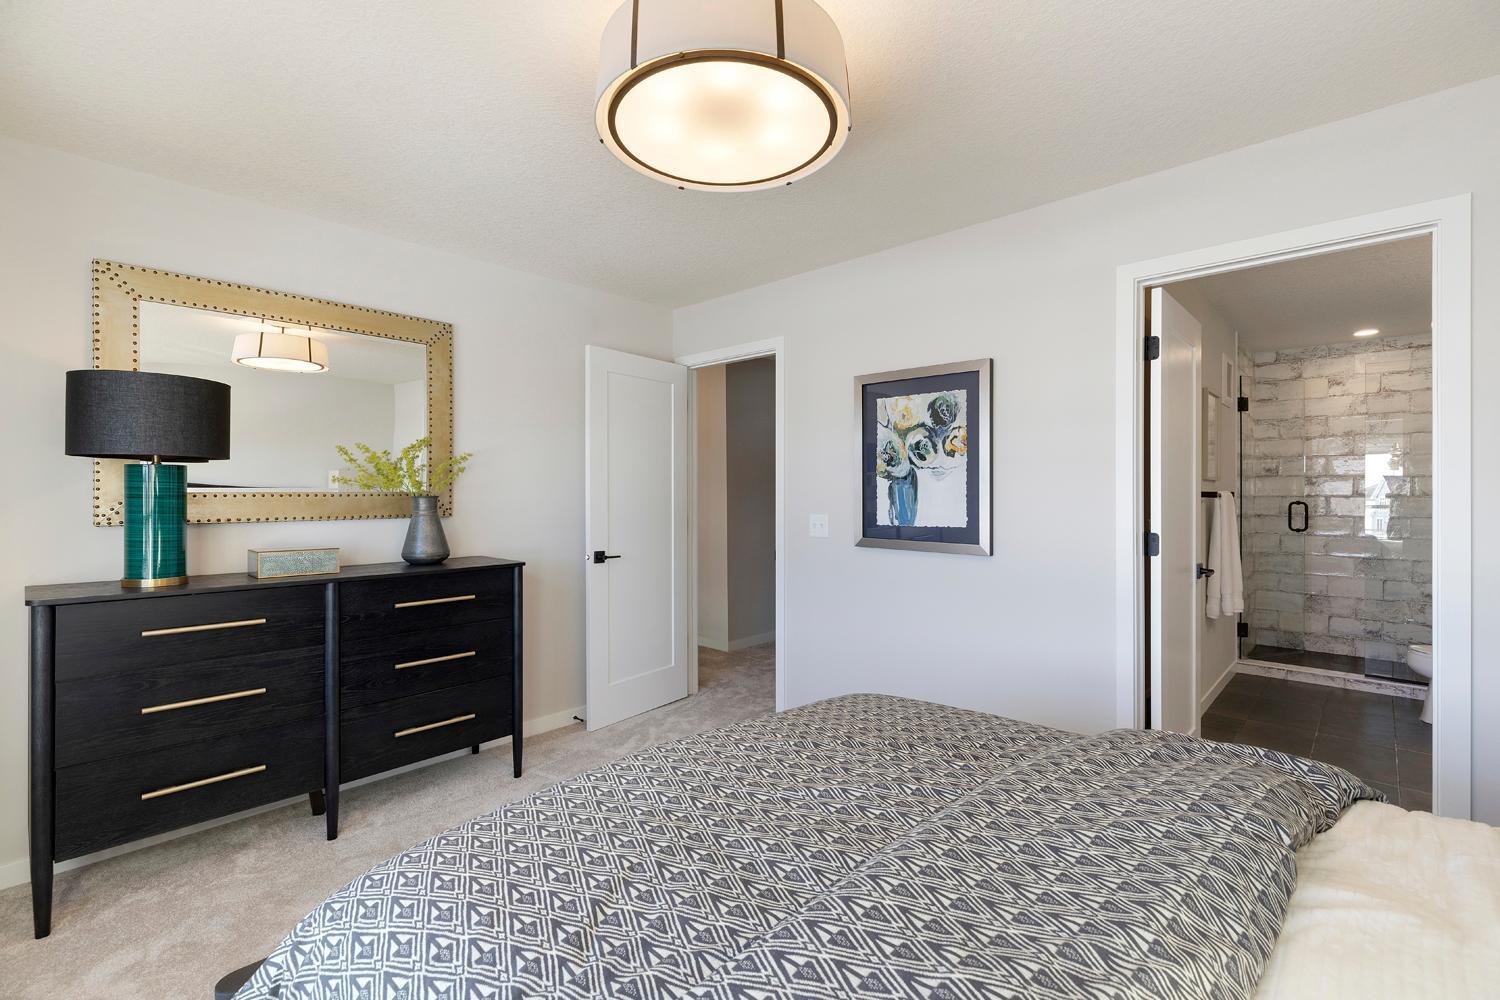 Owner's bedroom with private bath. Photos are of model home; features and options may vary.